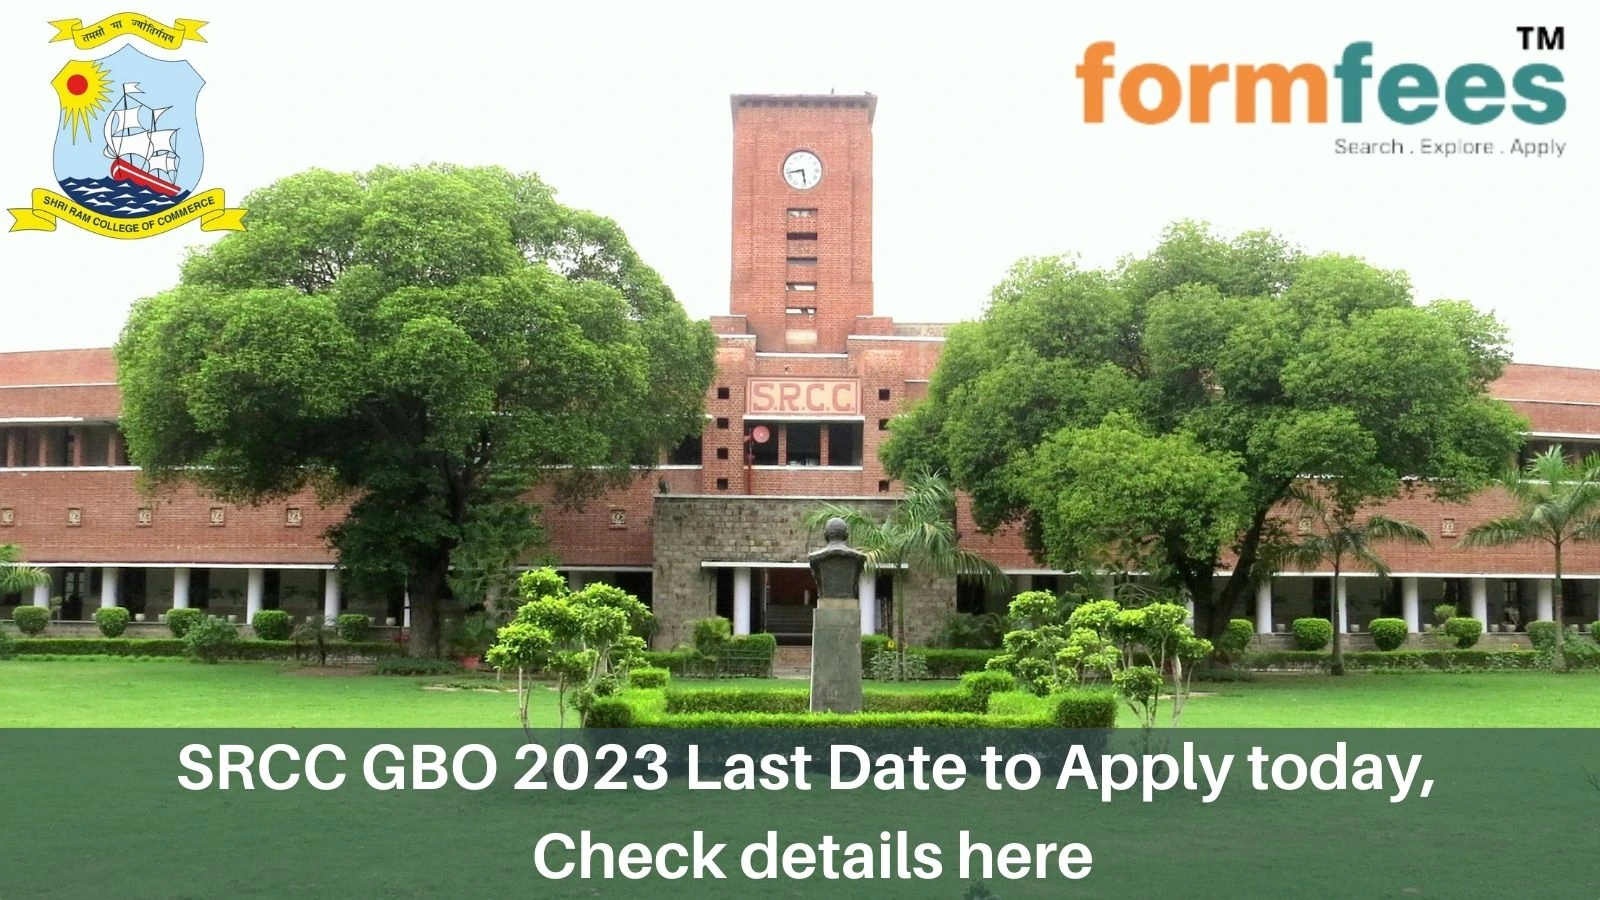 SRCC GBO 2023 Last Date to Apply today, Check details here